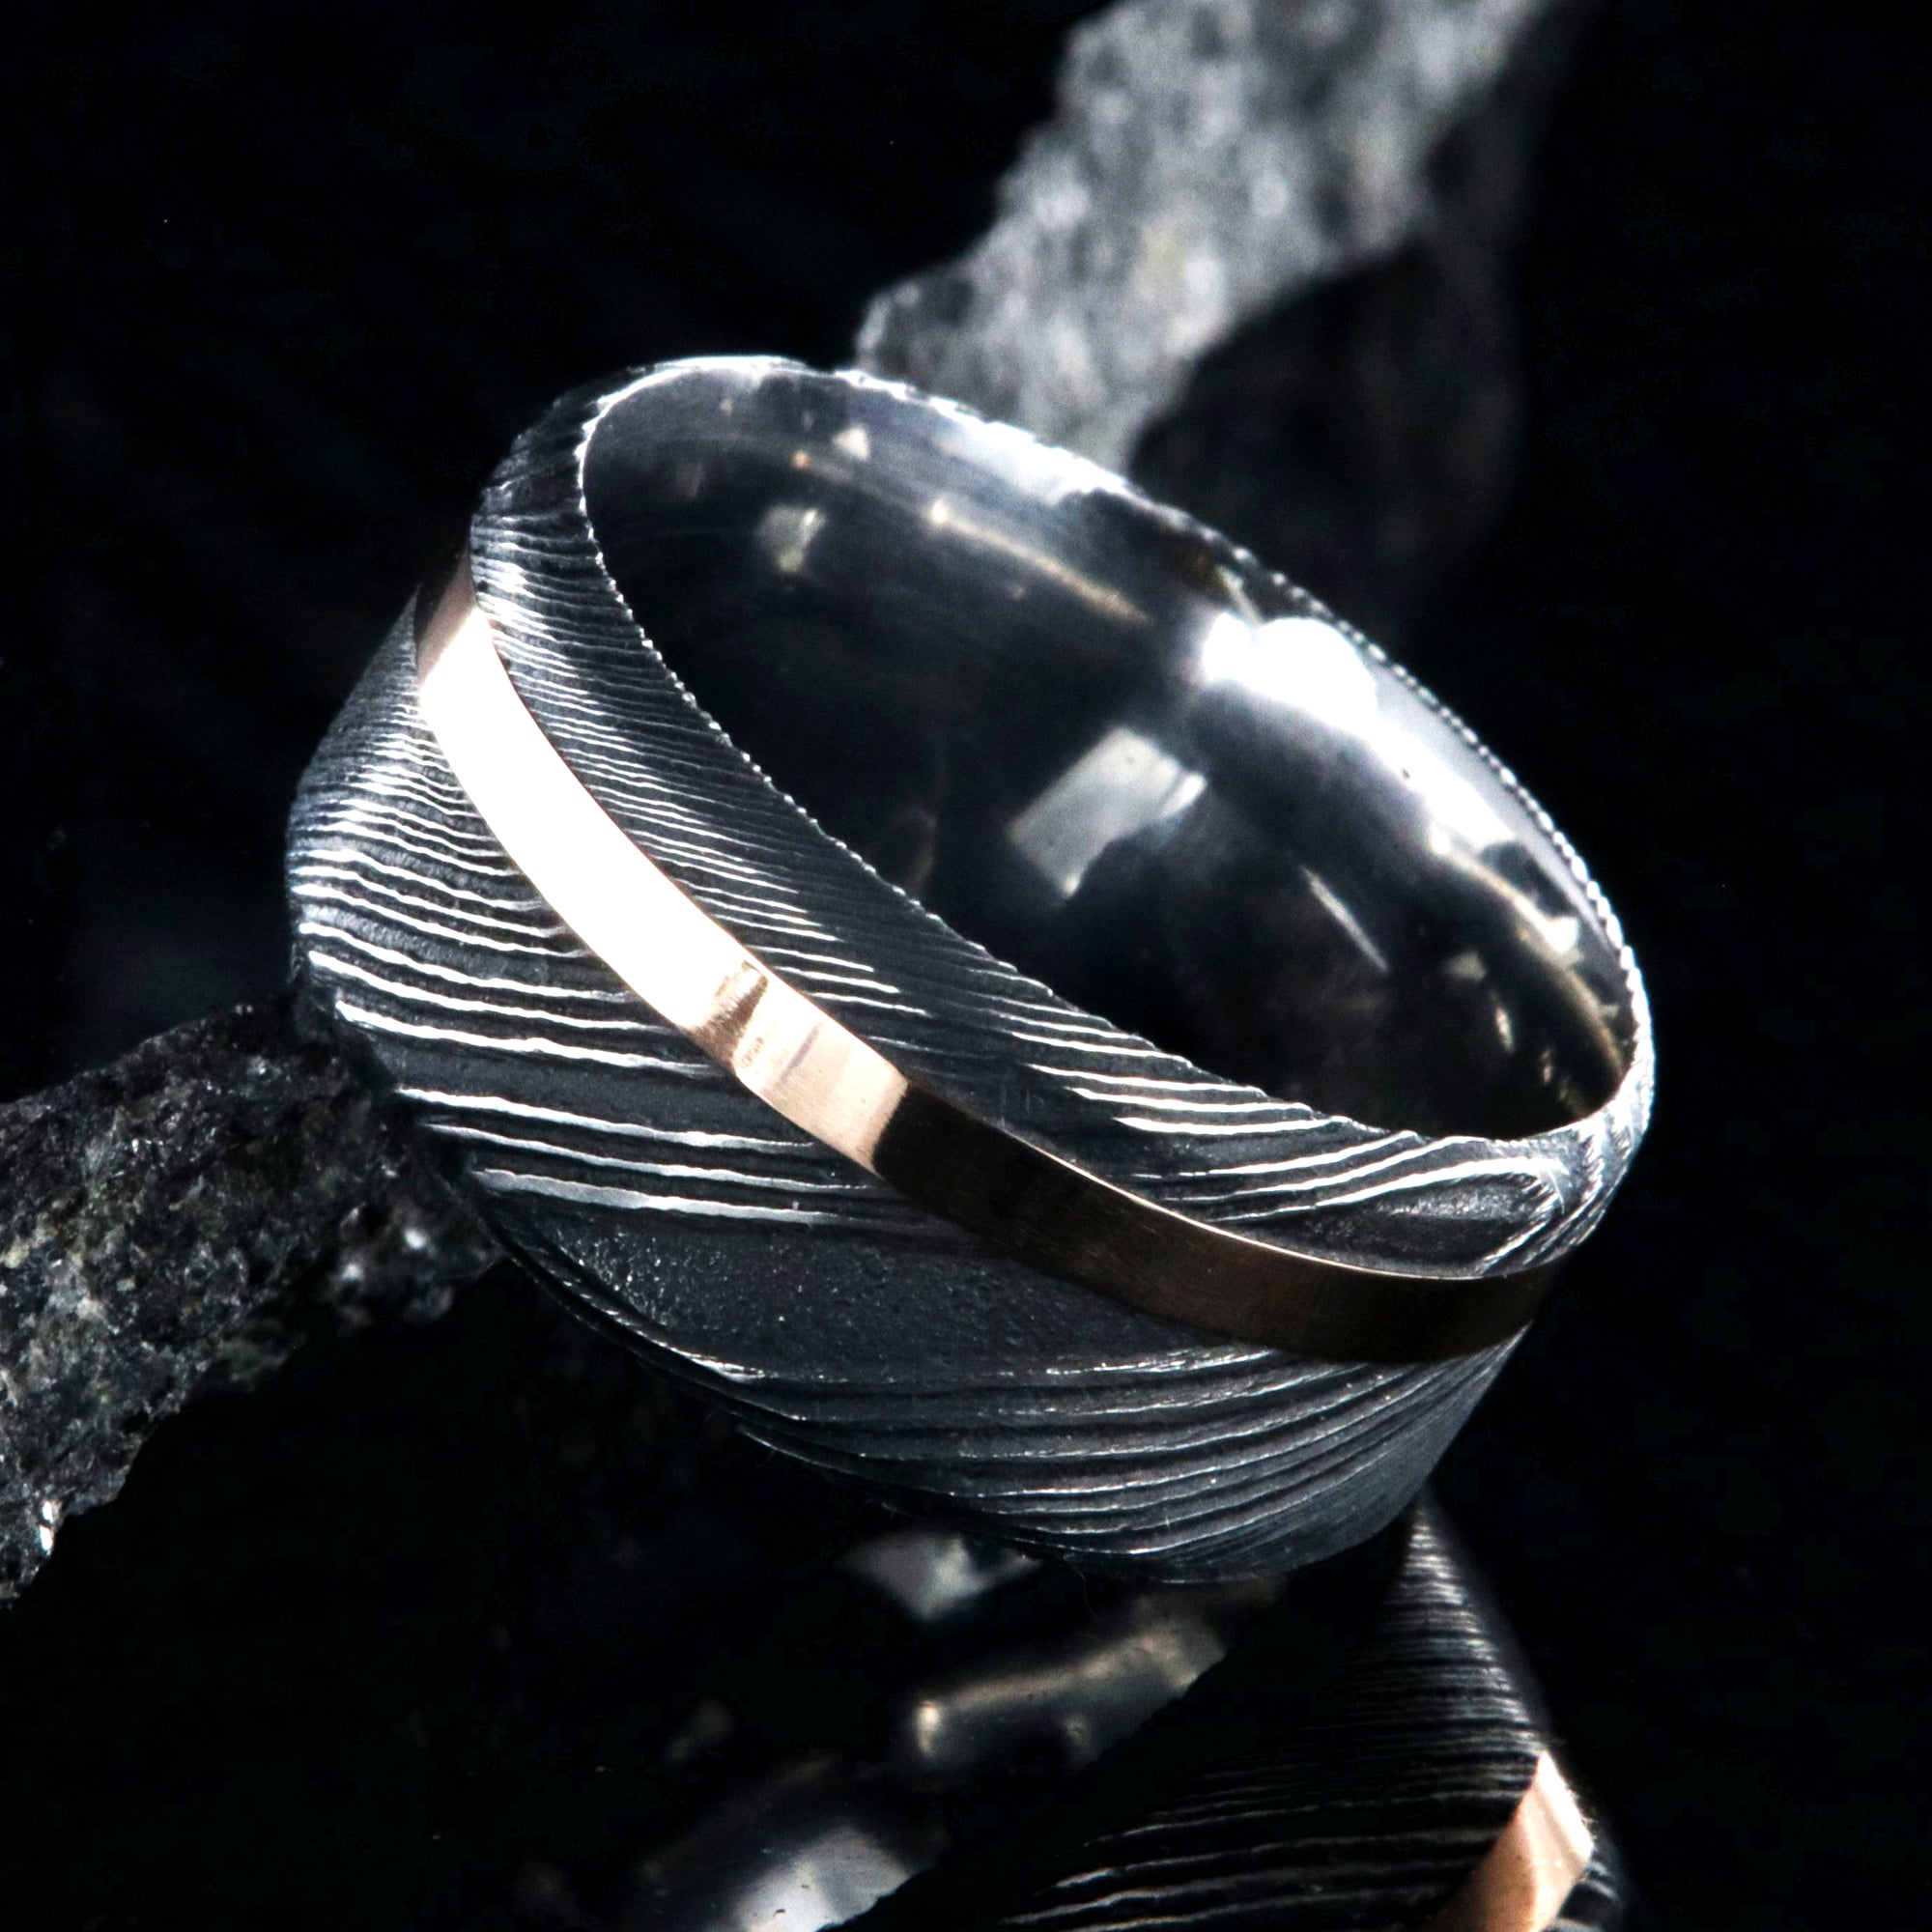 10mm wide black Damascus steel wedding band with an off-centered rose gold inlay and flat profile